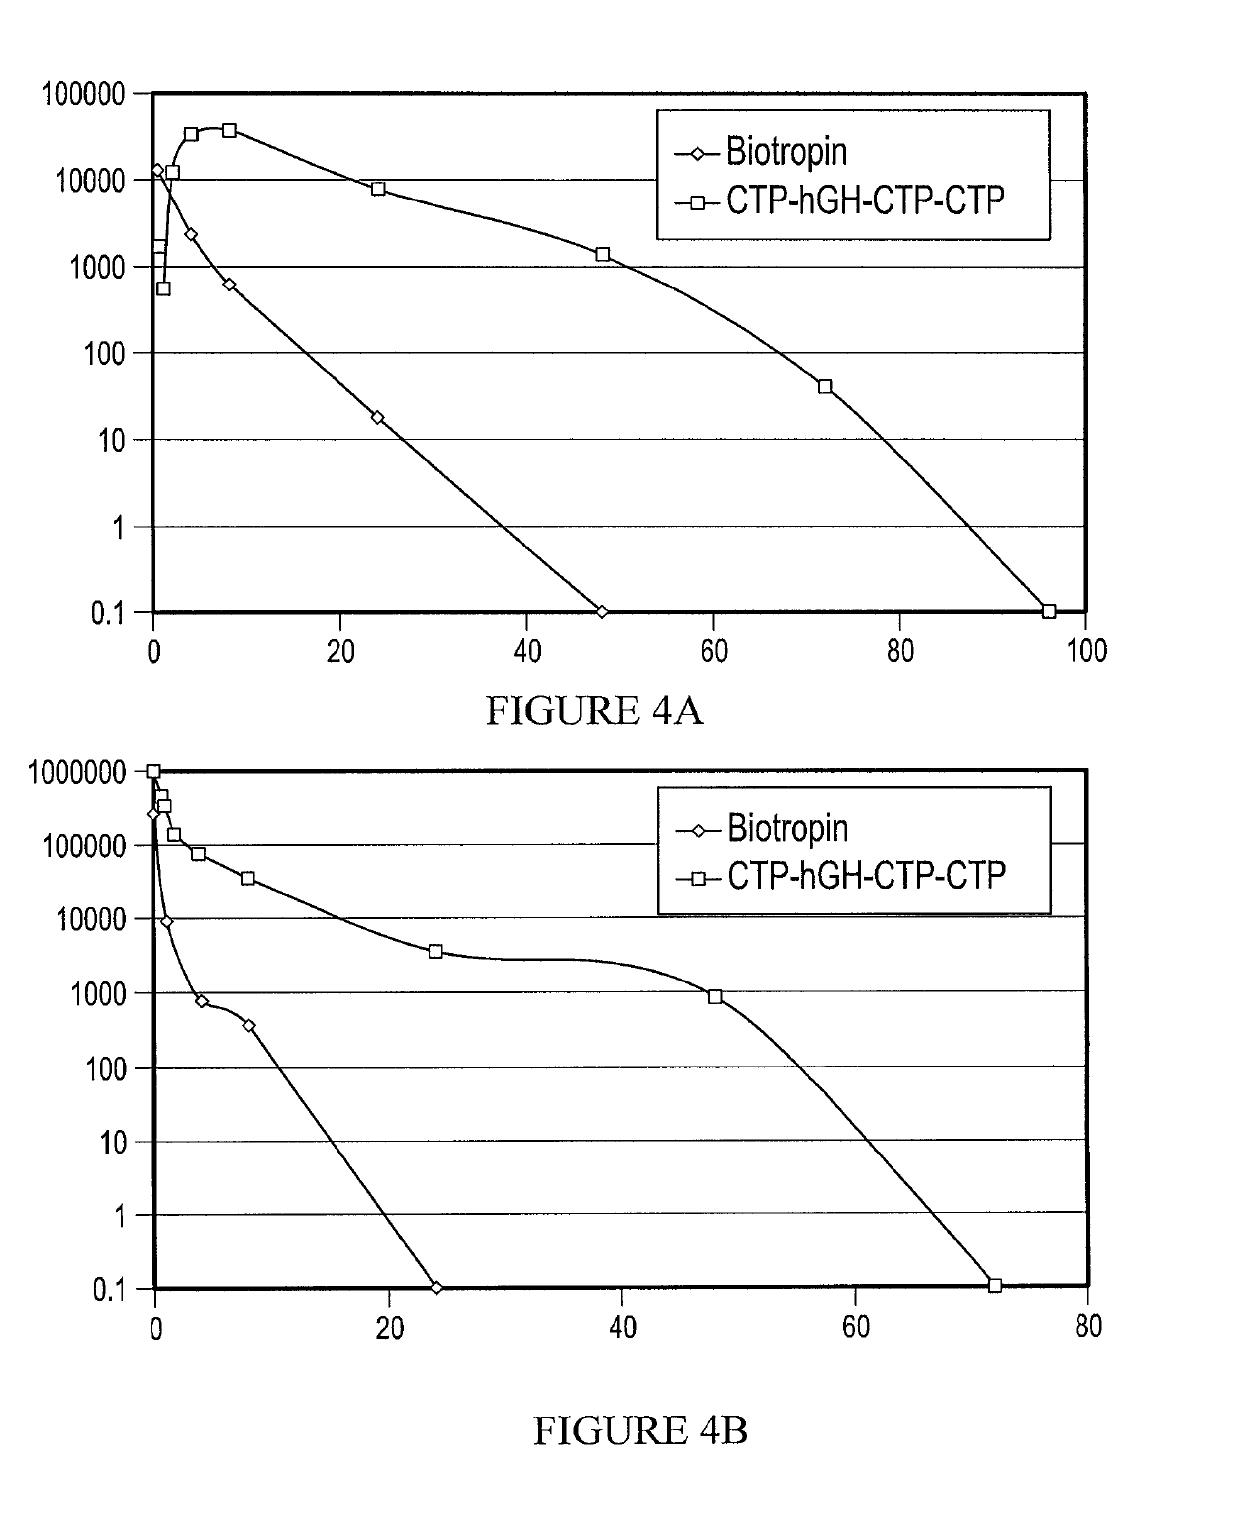 Methods of treatment with long-acting growth hormone